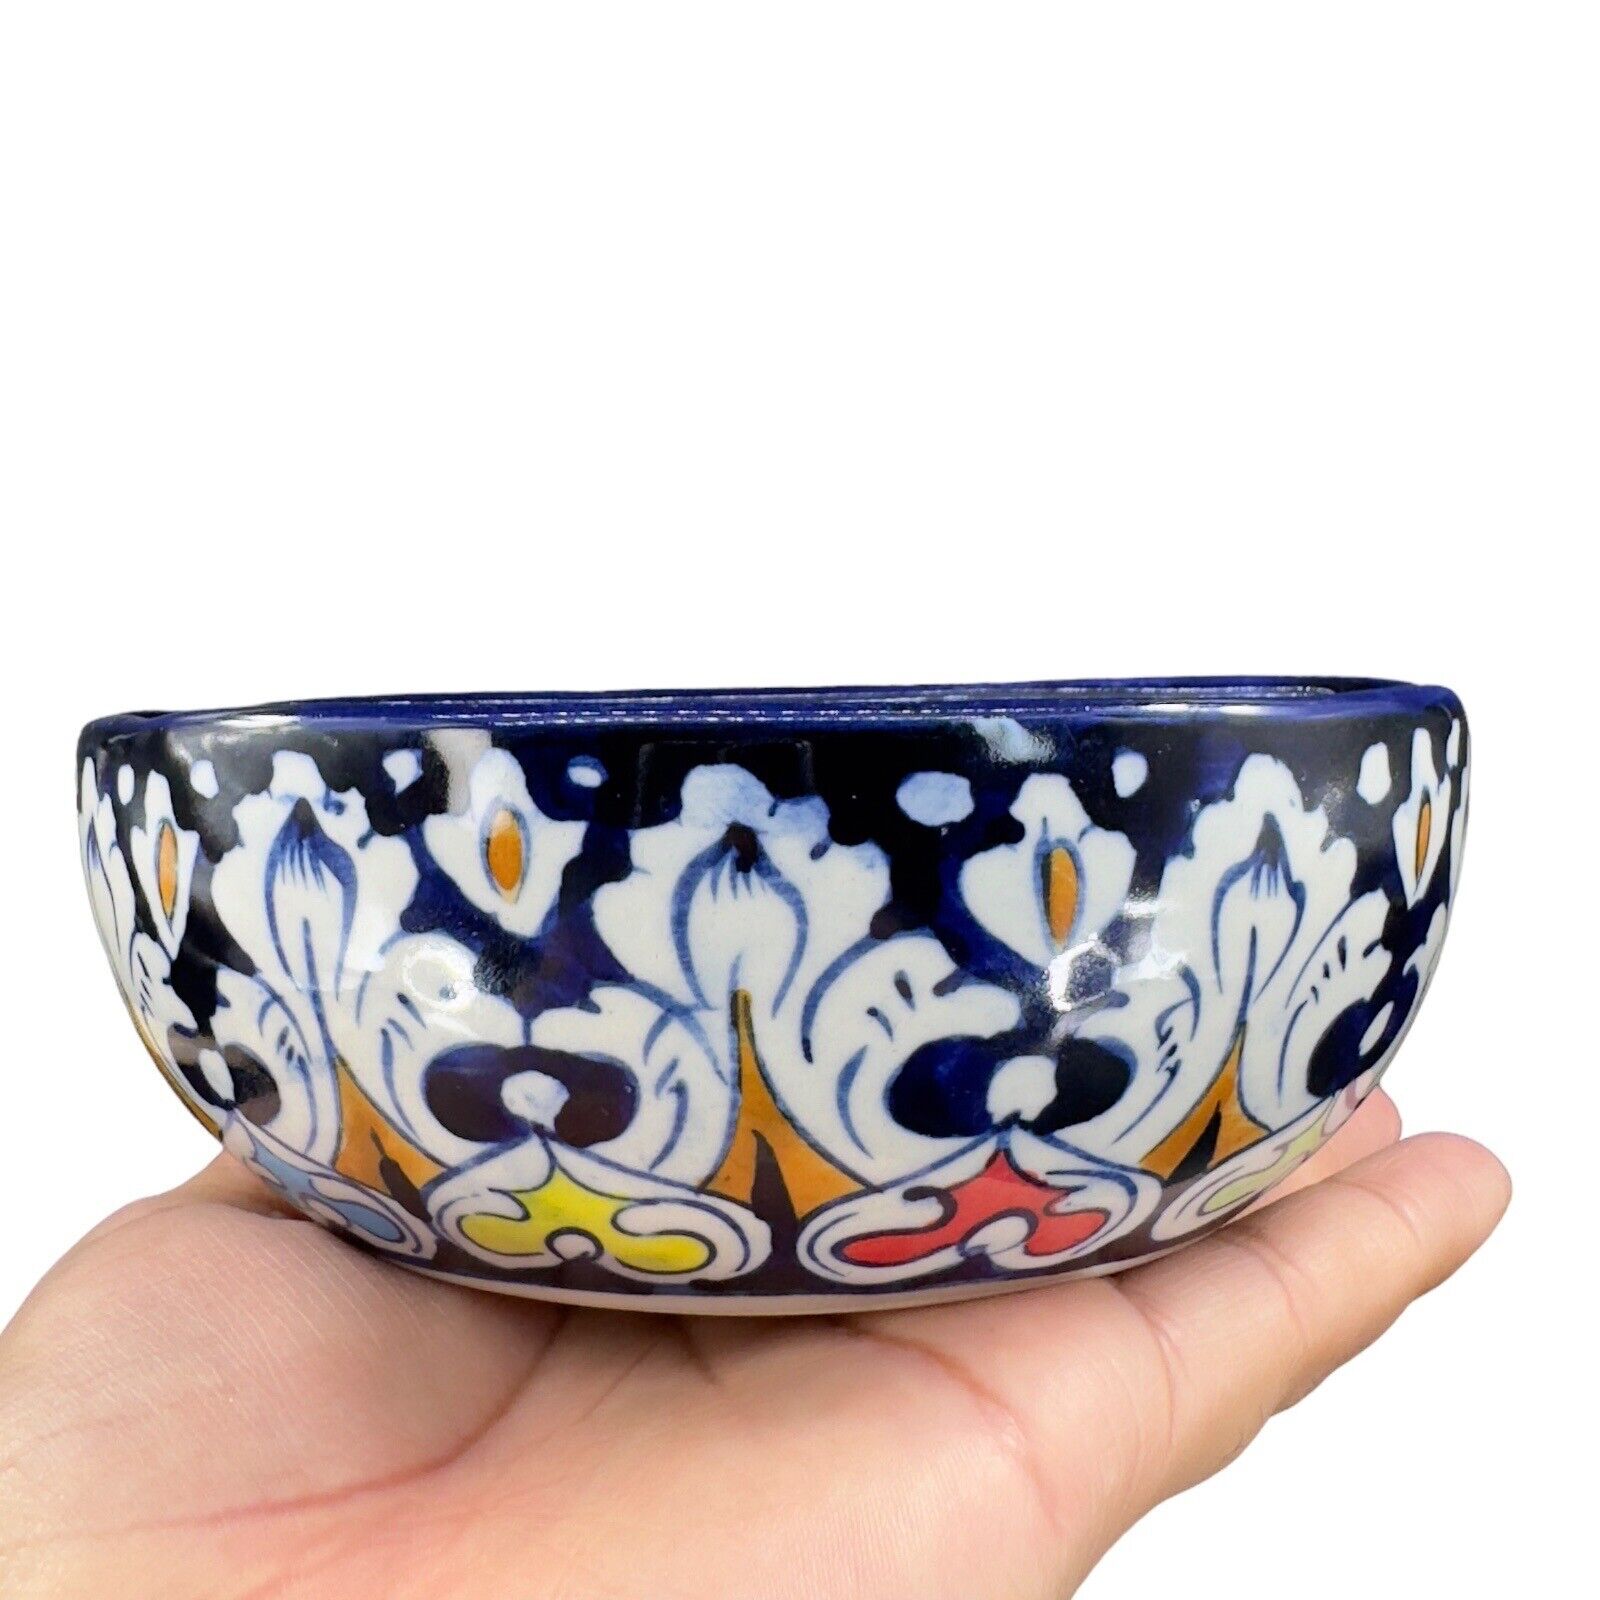 Hand Made Polish Pottery Dish Bowl Flat Side Colorful Pattern Hand Painted VTG